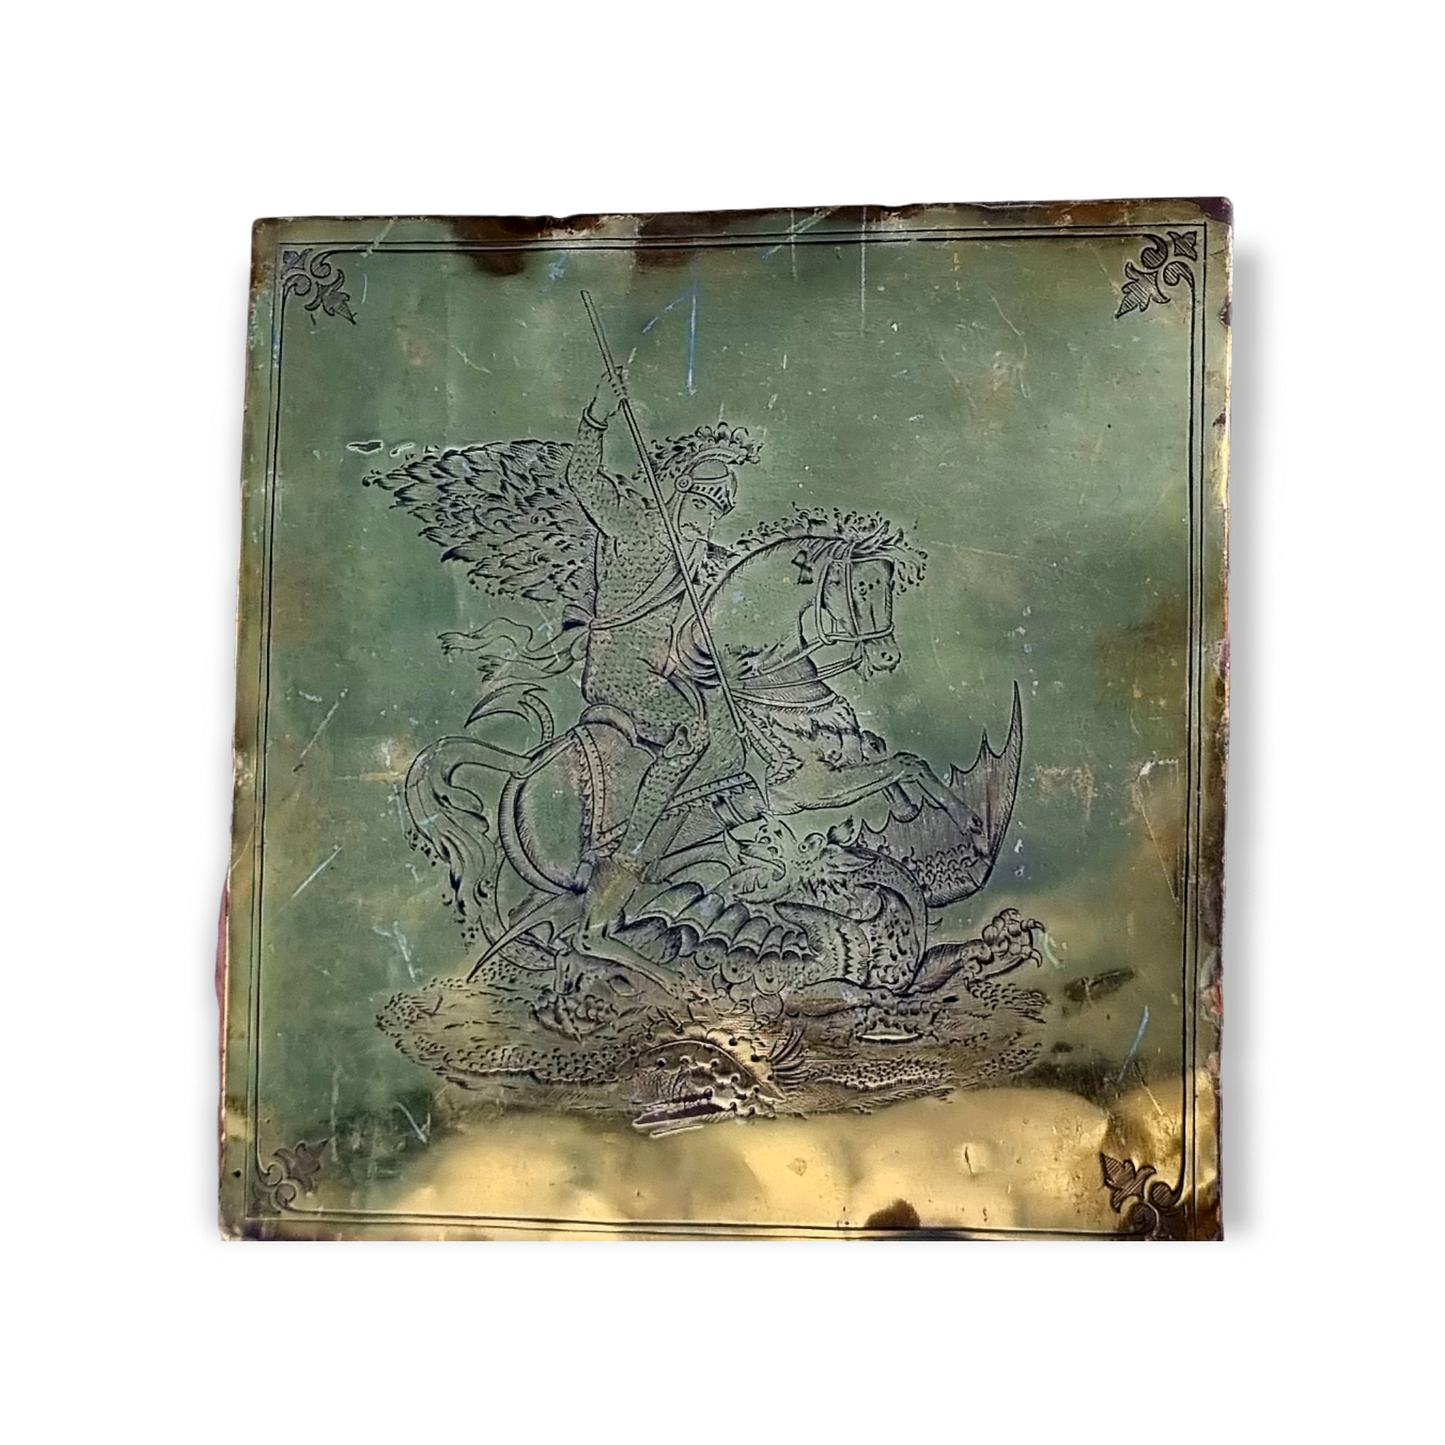 19th Century English Antique Brass Plaque Engraved With Saint George Slaying The Dragon